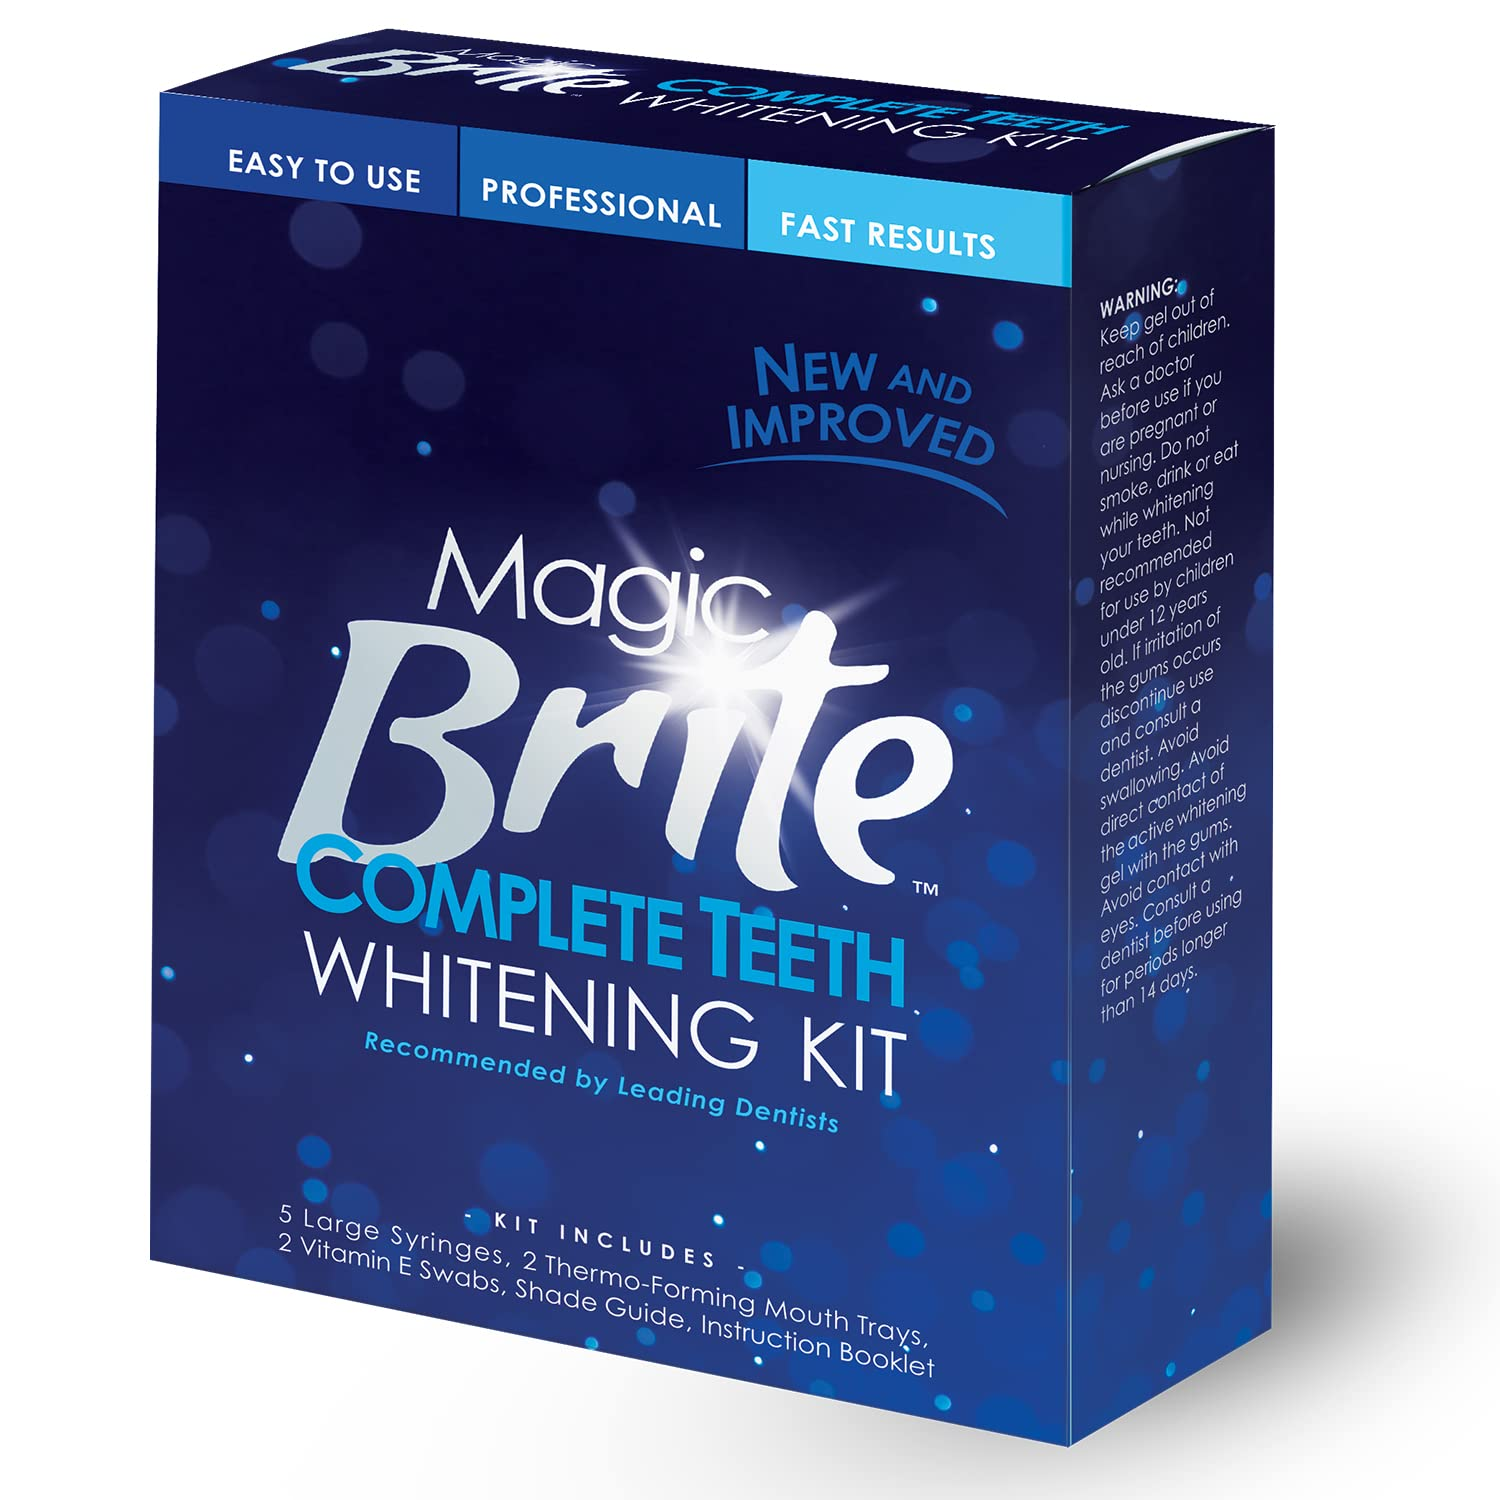 Magicbrite Complete Teeth Whitening Kit at Home Whitener - LED Light, 35% Carbamide Peroxide, 2 Mouth Trays, (3) 3Ml Gel Syringes, Painless Effective 